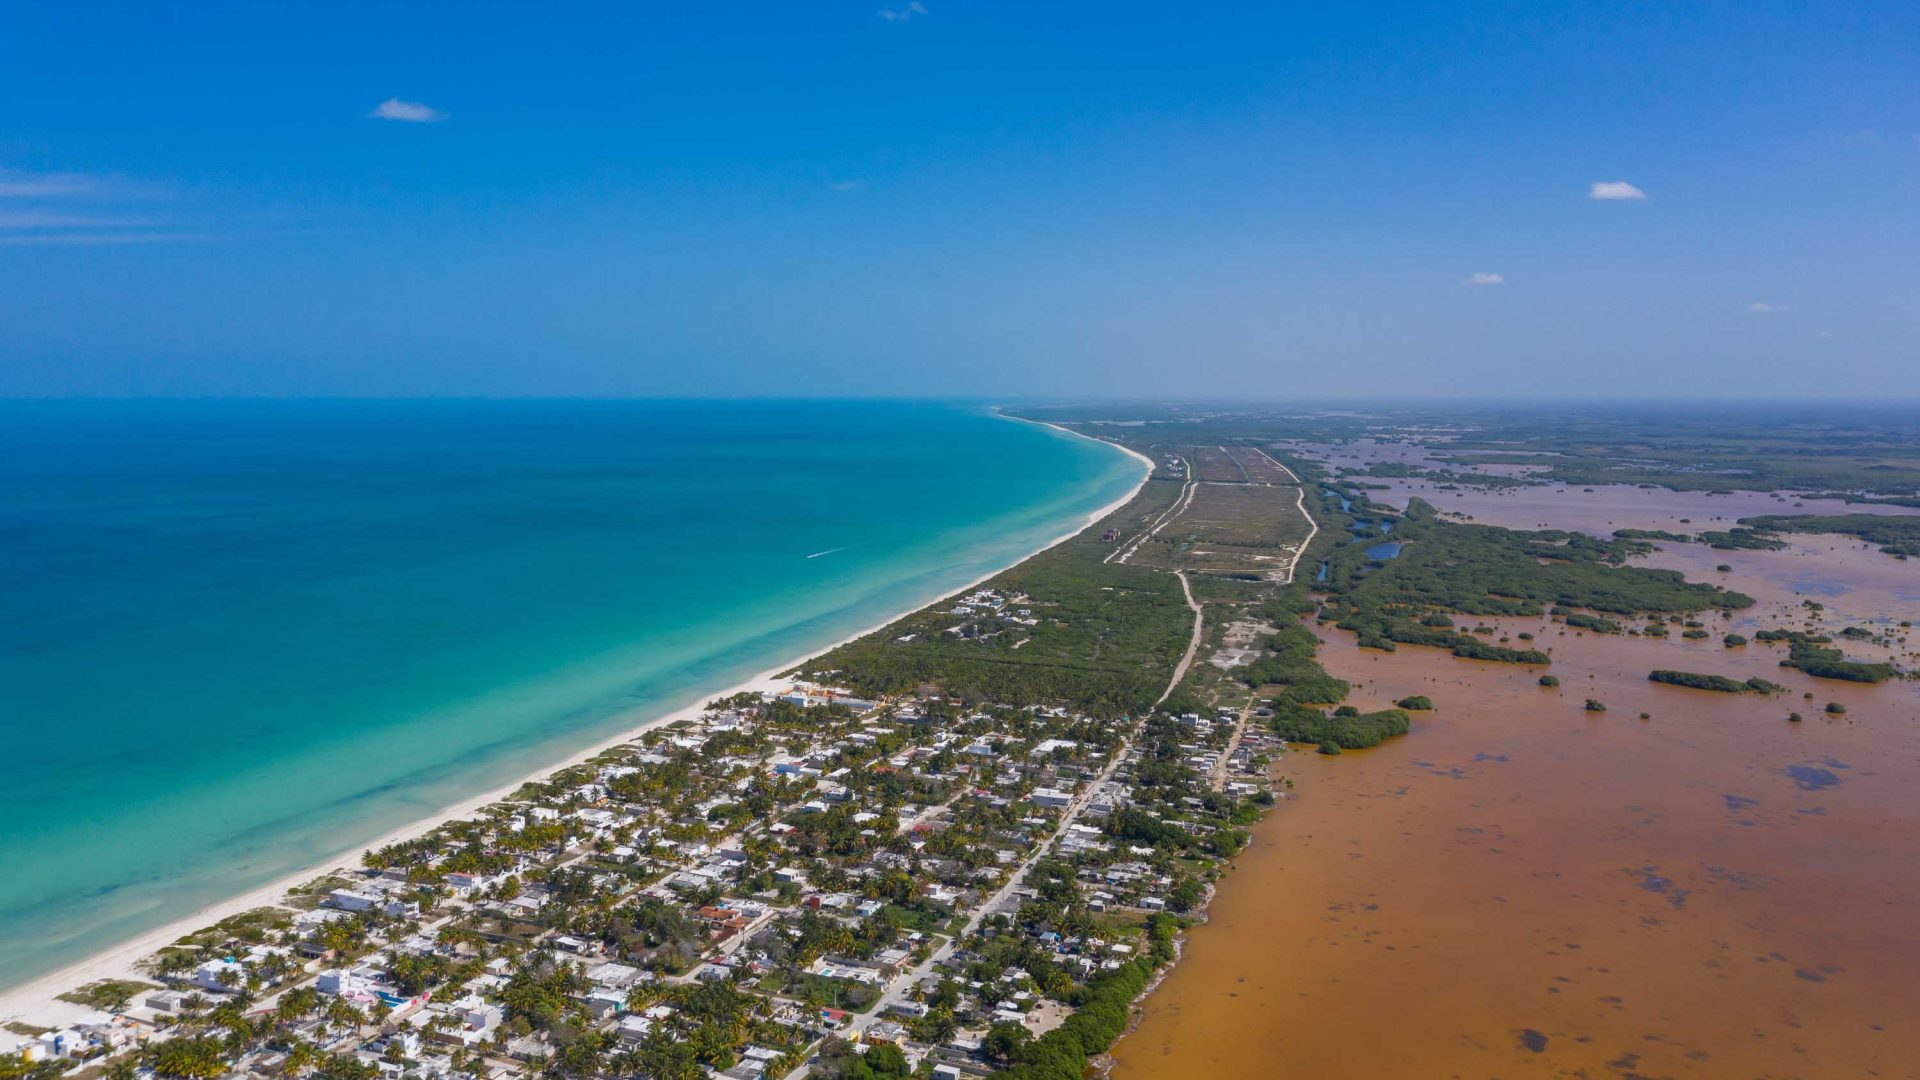 An aerial photo showing brown water, mangroves and green trees, a city and blue water on the other side.